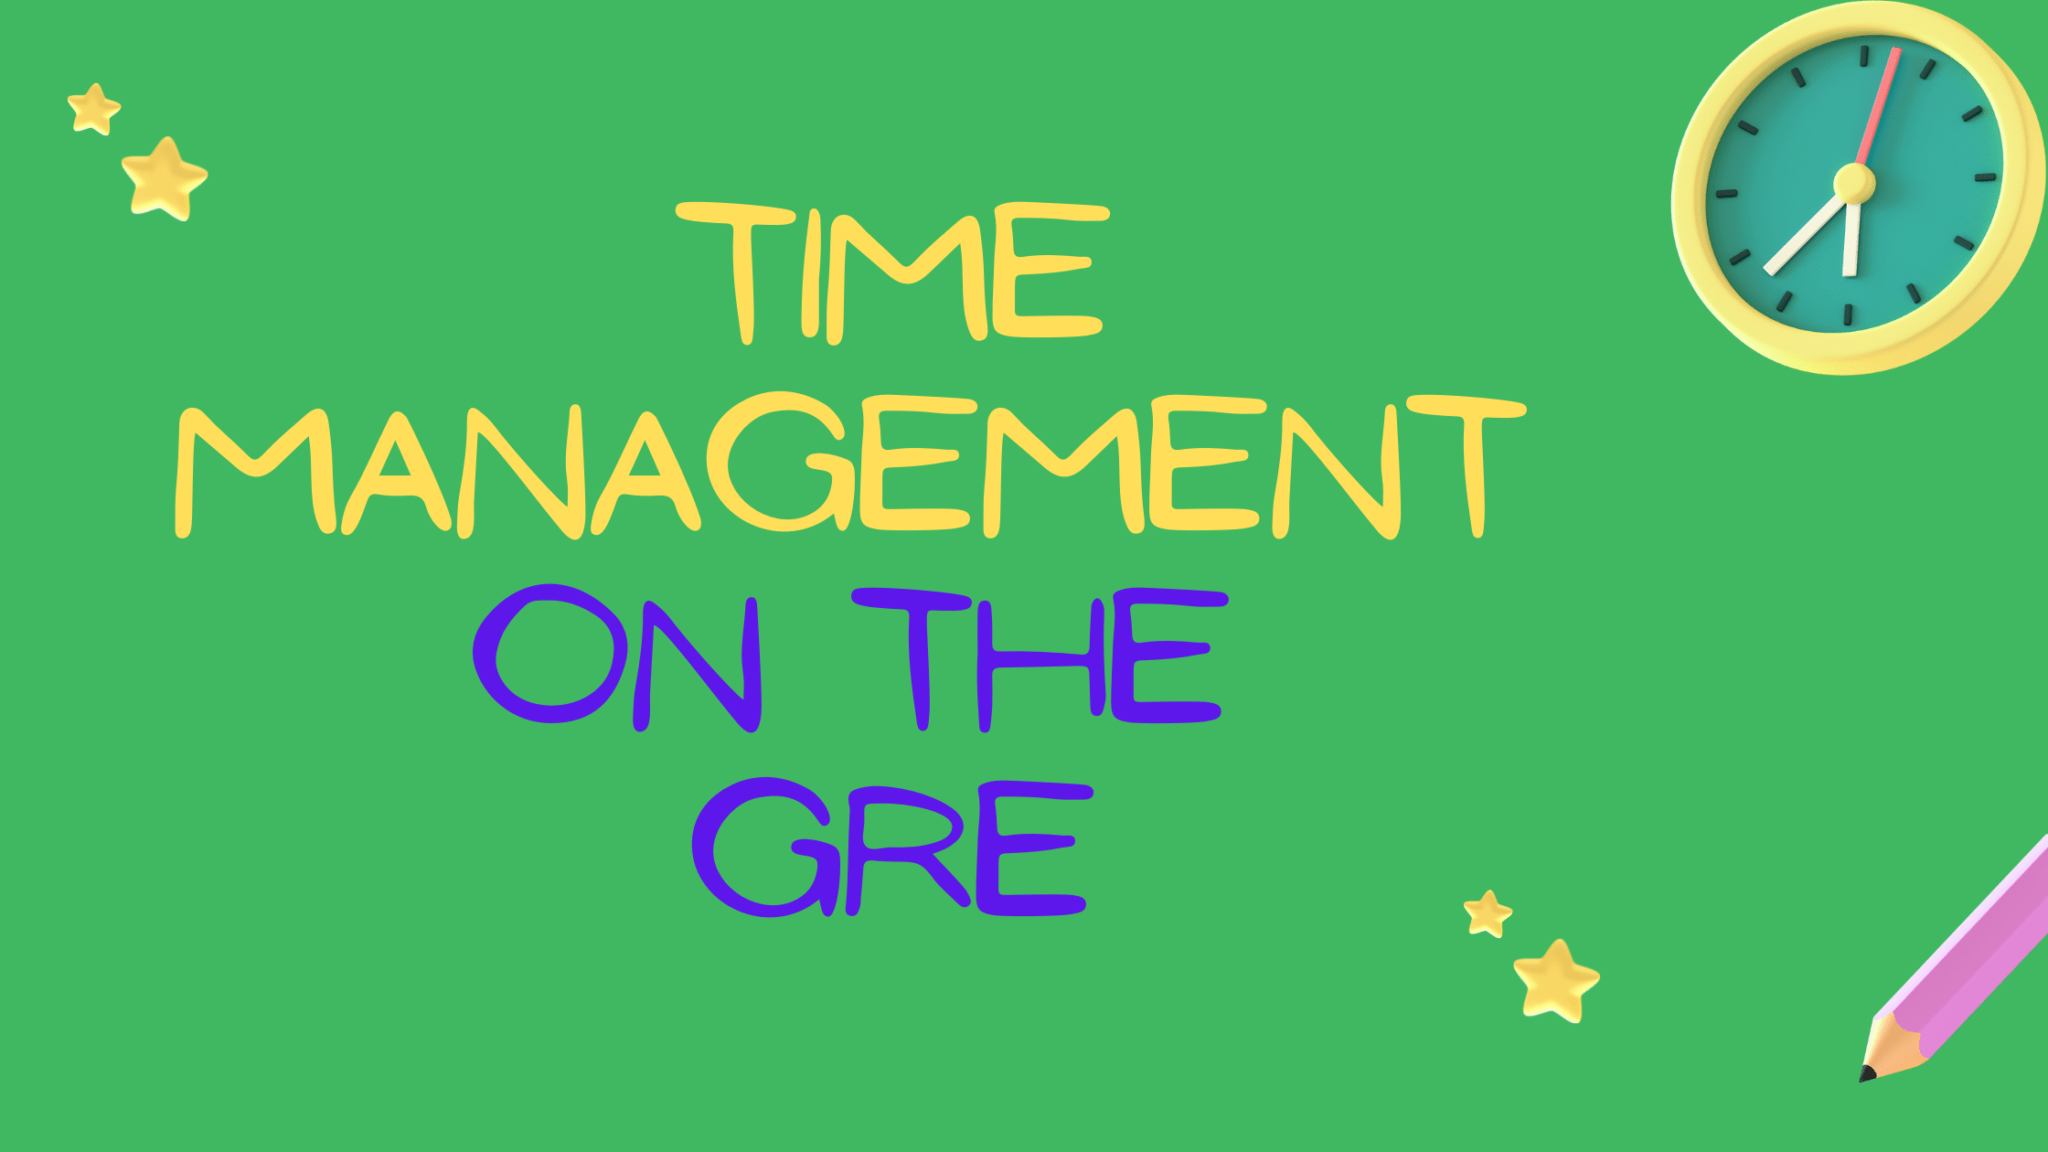 Time Management on the GRE – Tips and Tricks